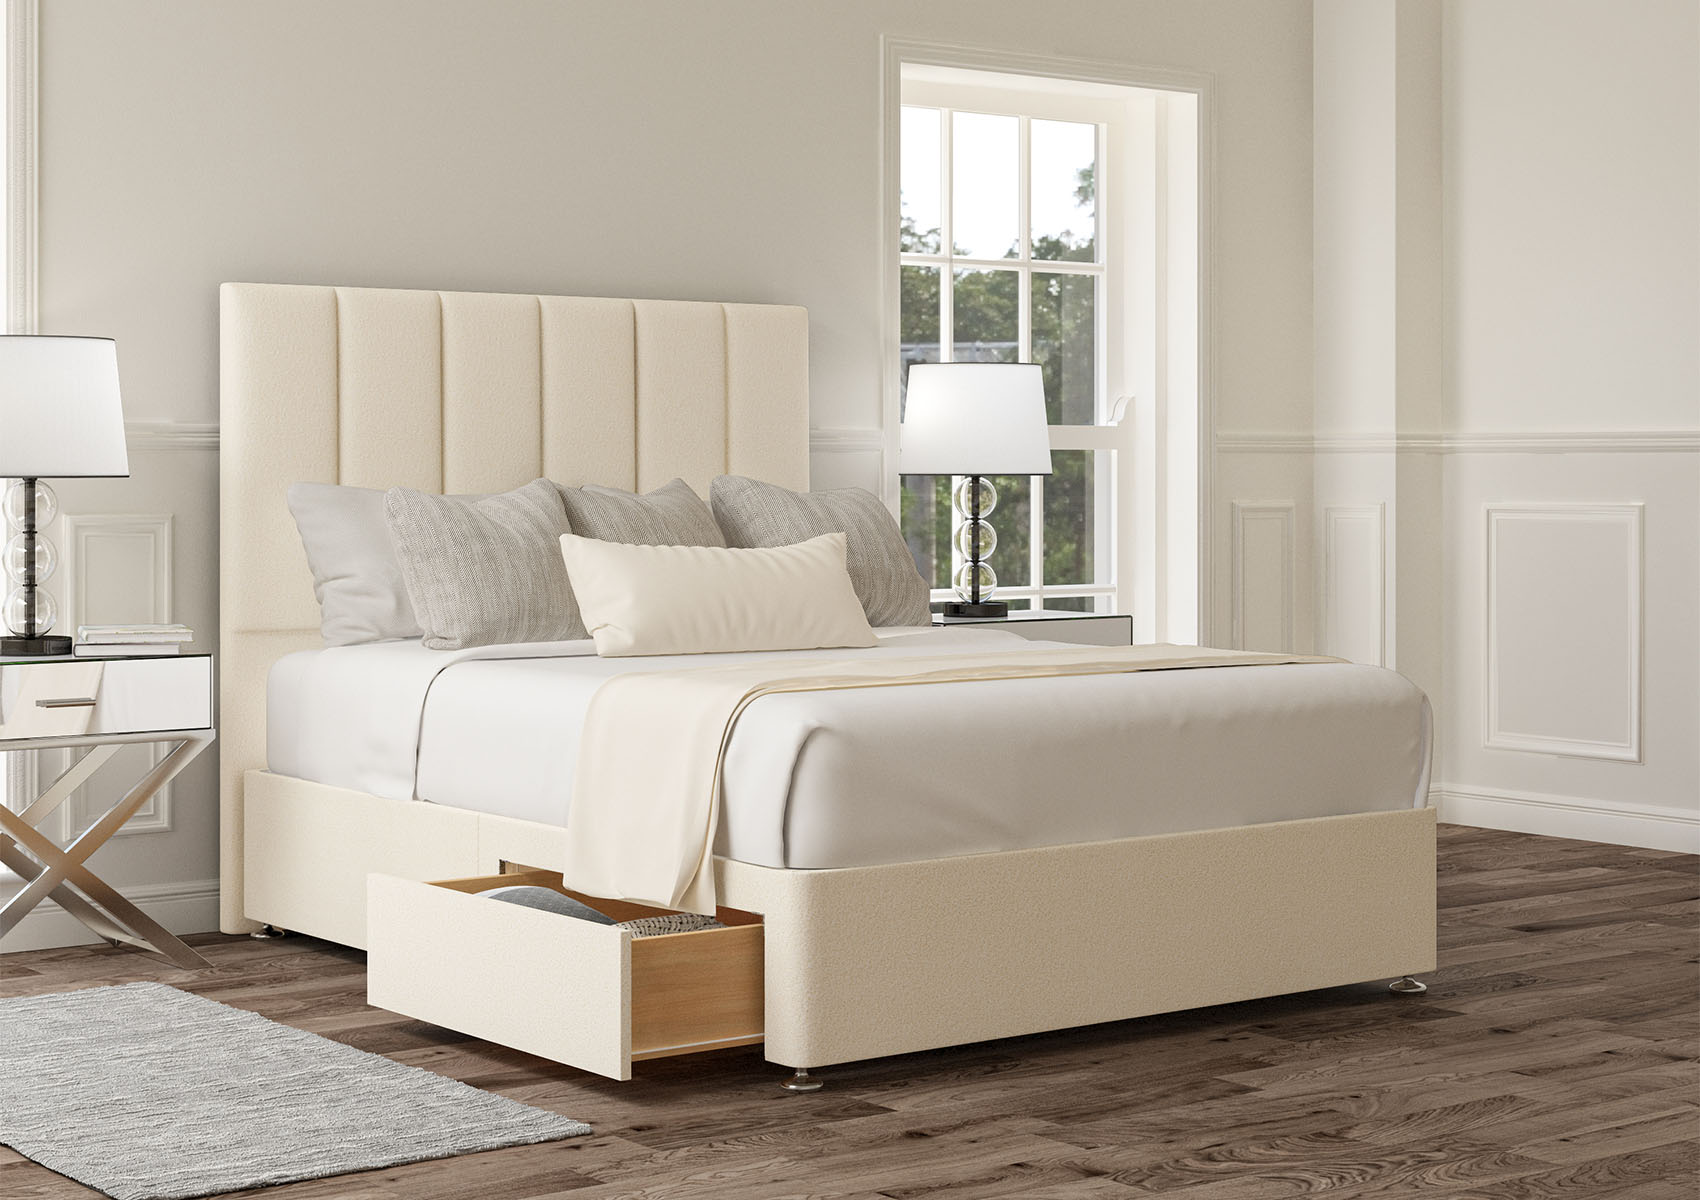 View Empire Teddy Cream Upholstered King Size Divan Bed Time4Sleep information